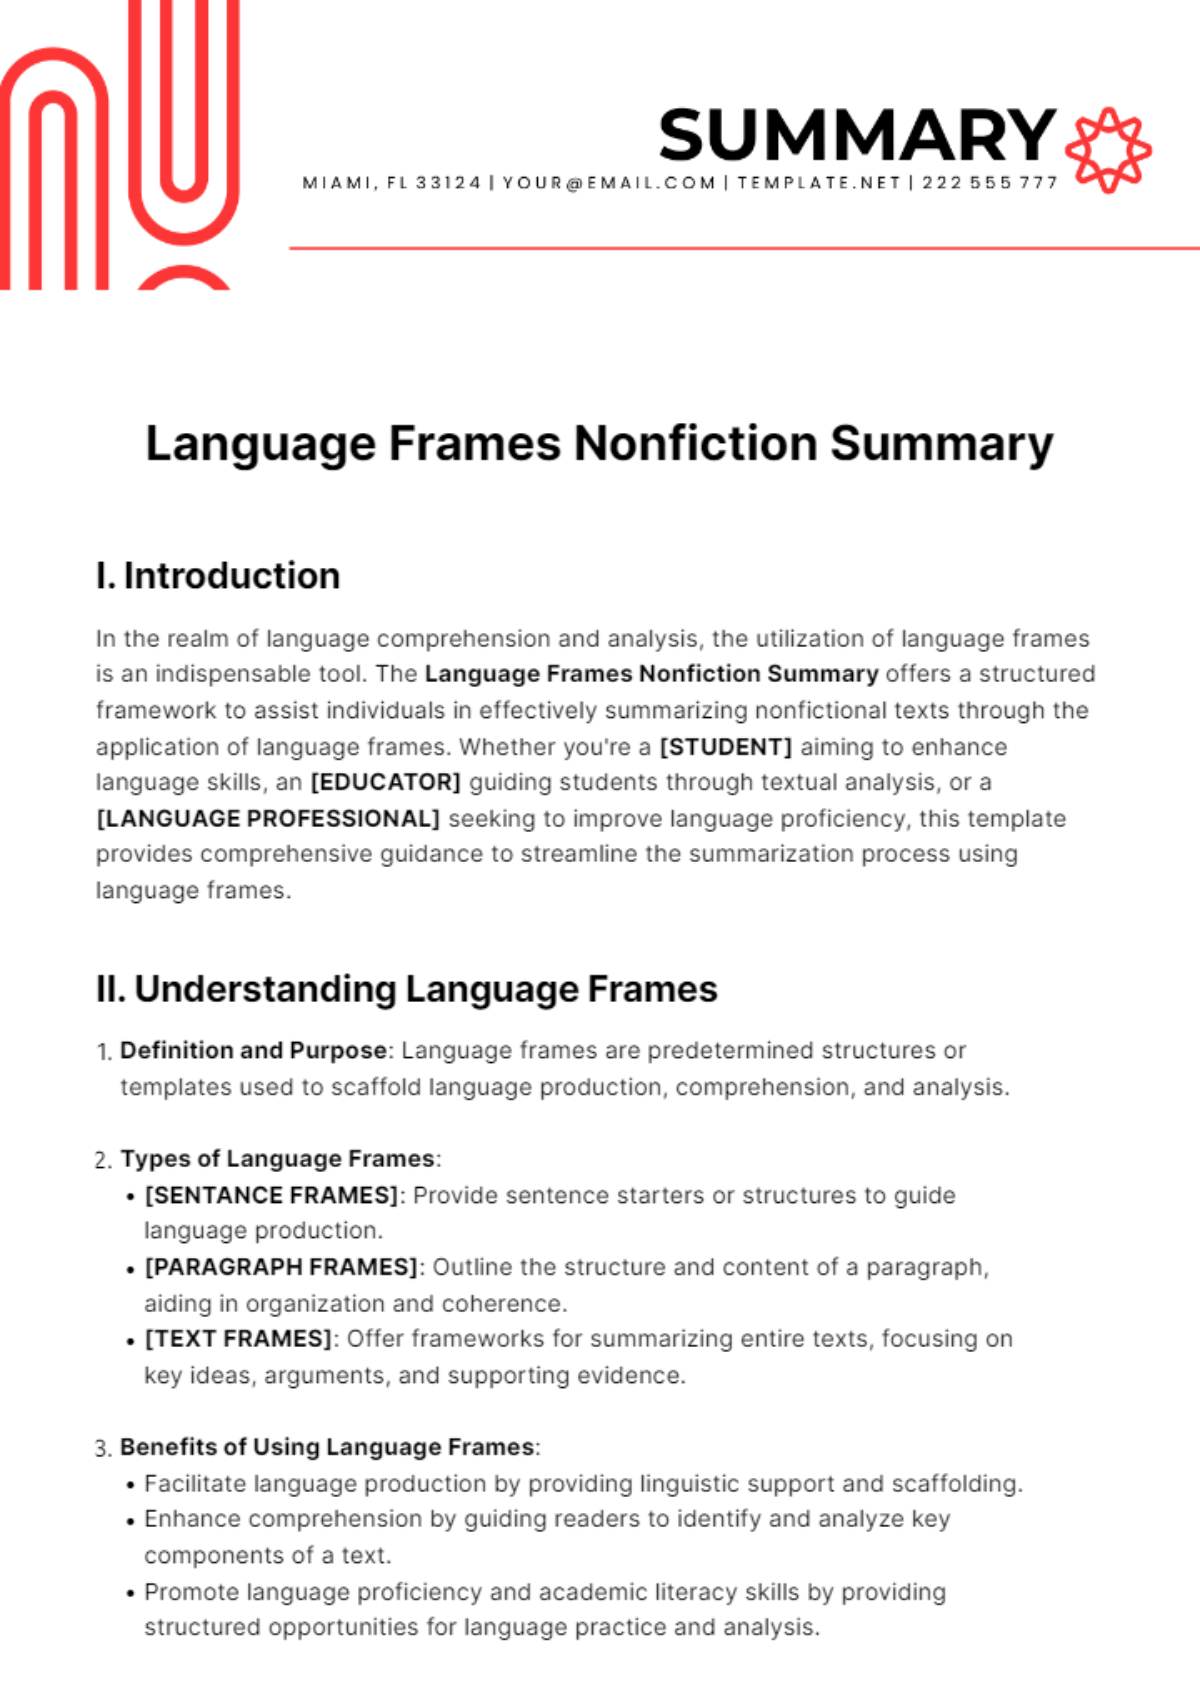 Free Language Frames Nonfiction Summary Template